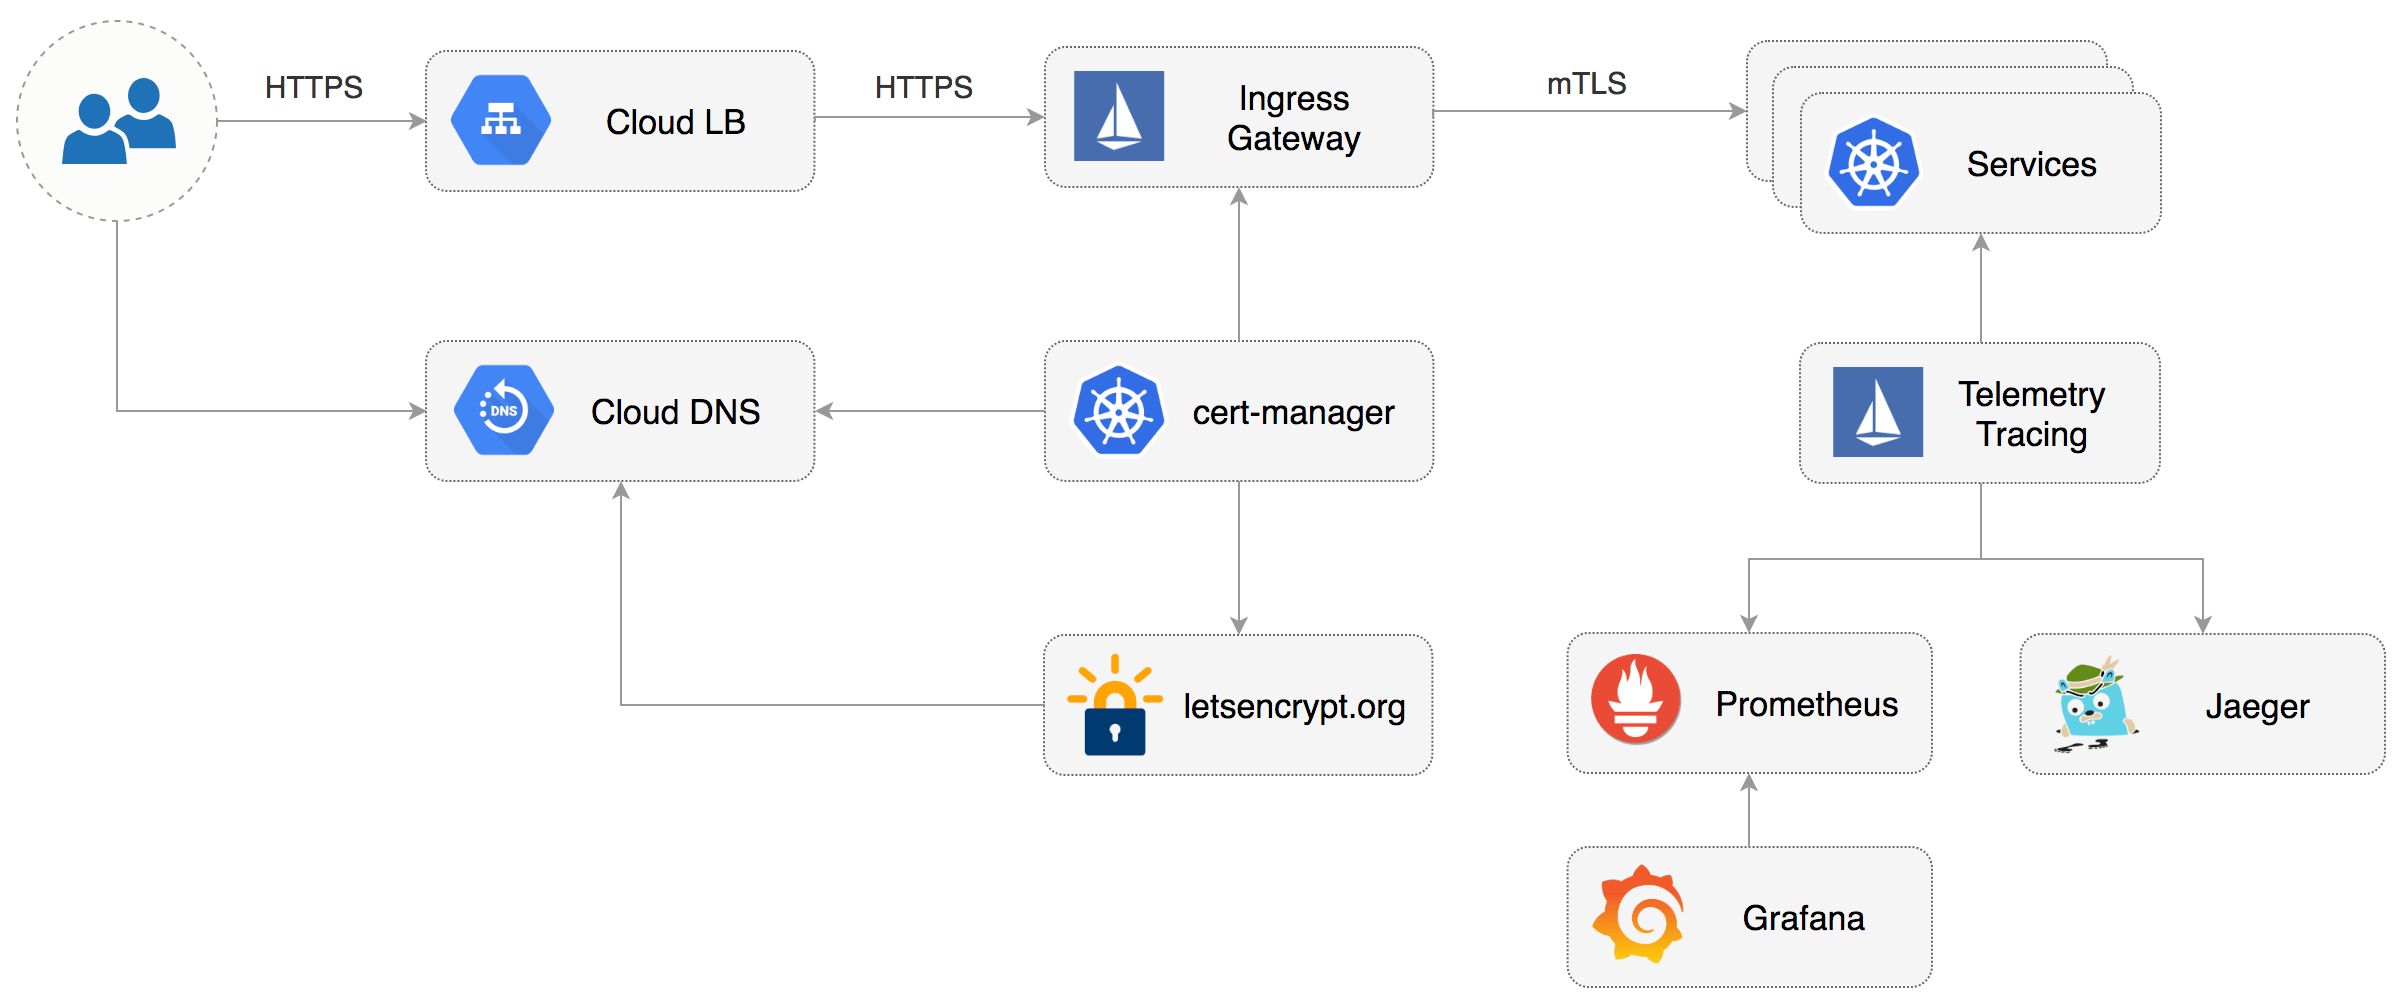 Istio service mesh guides